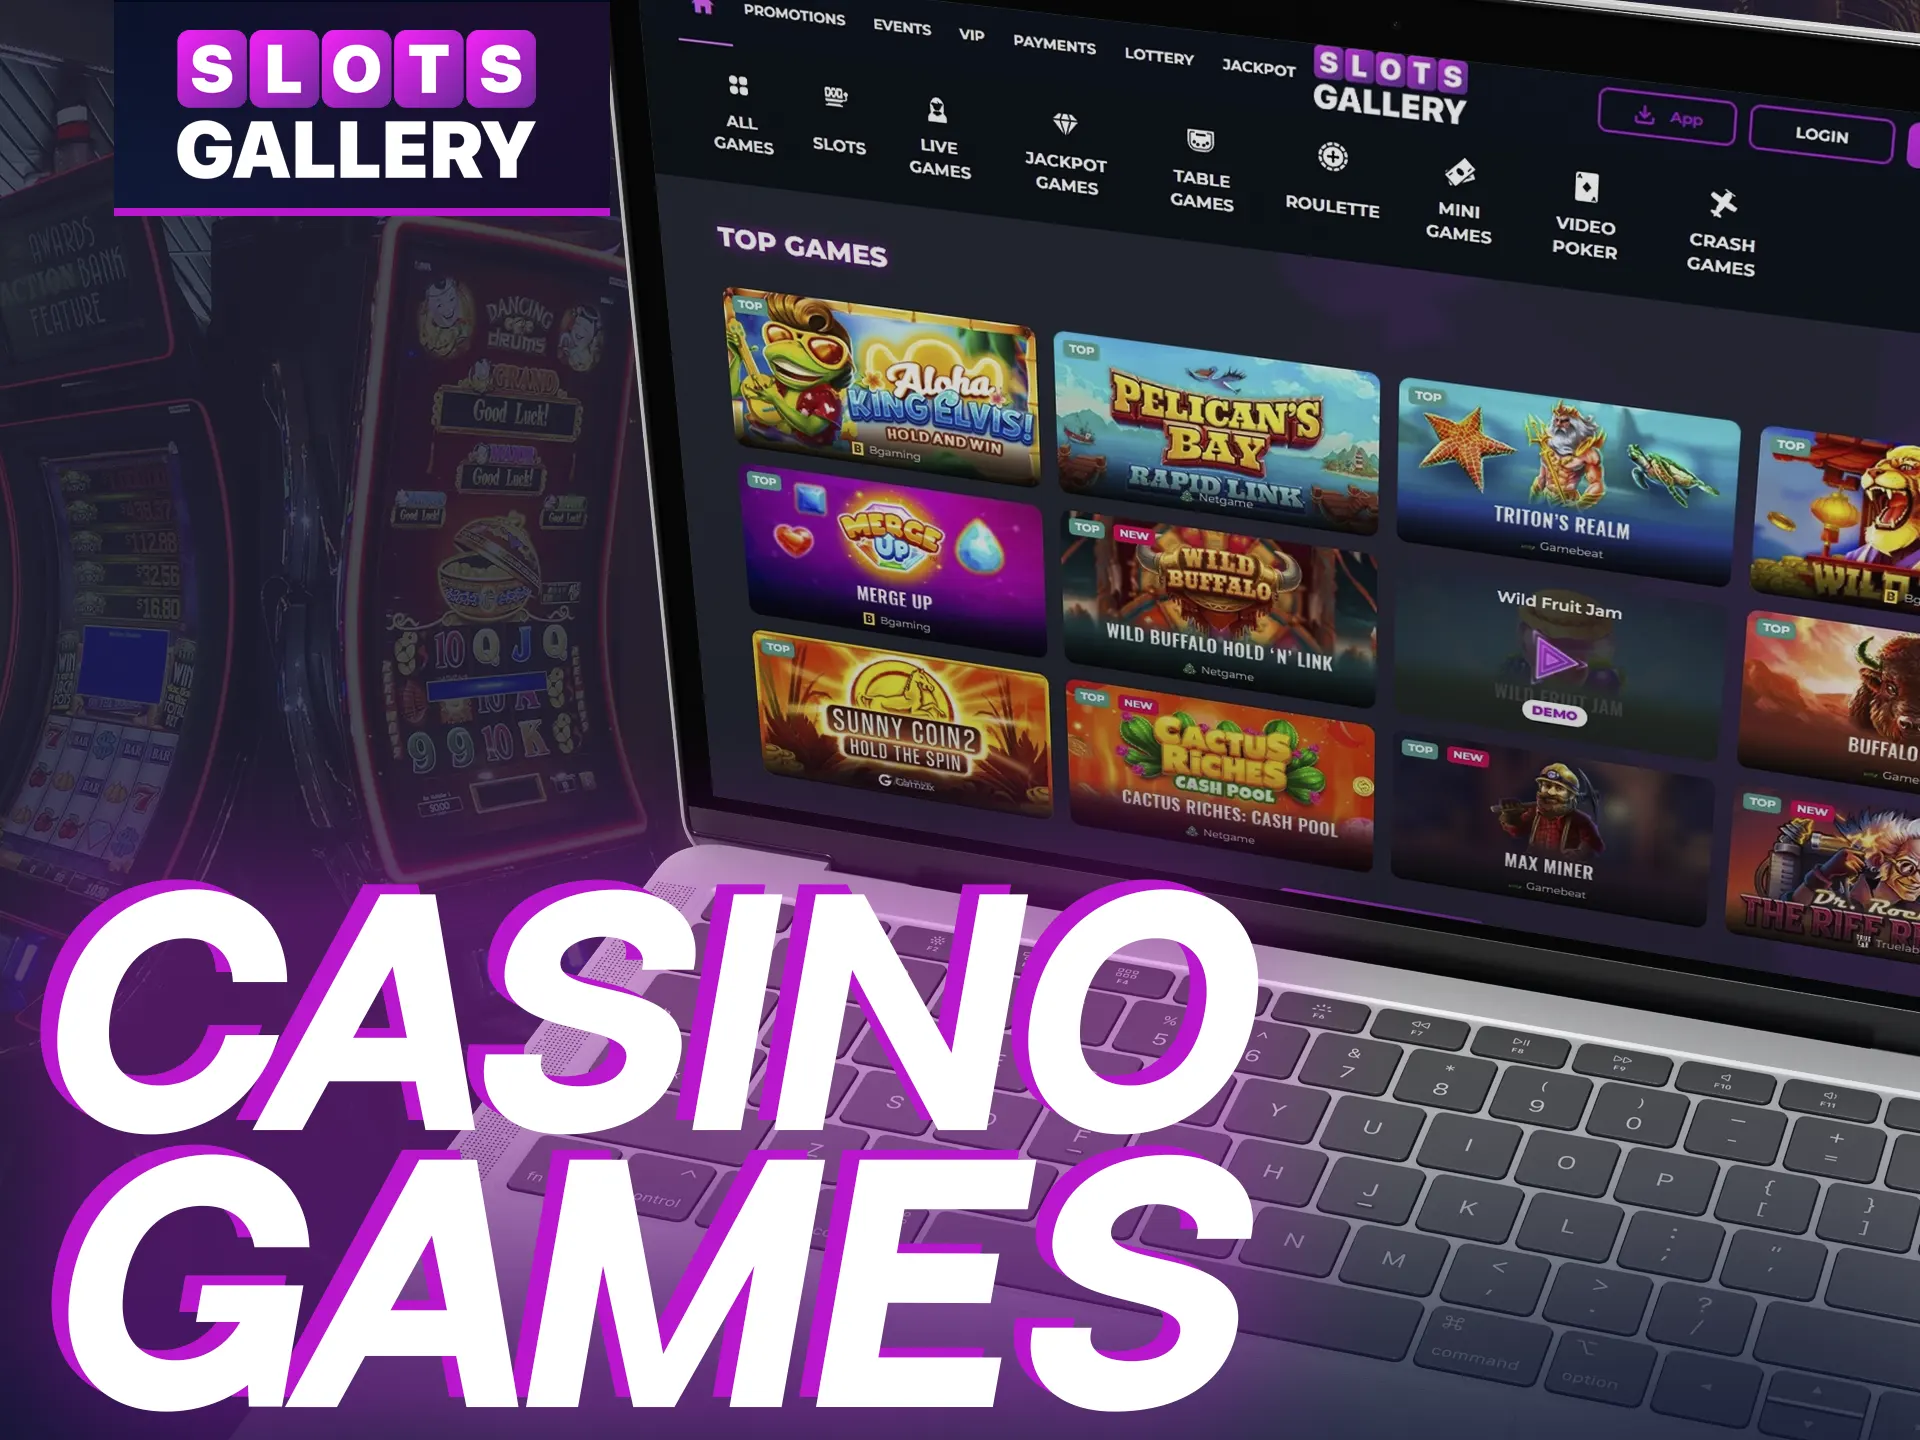 Slots Gallery offers 9500+ games with various categories.